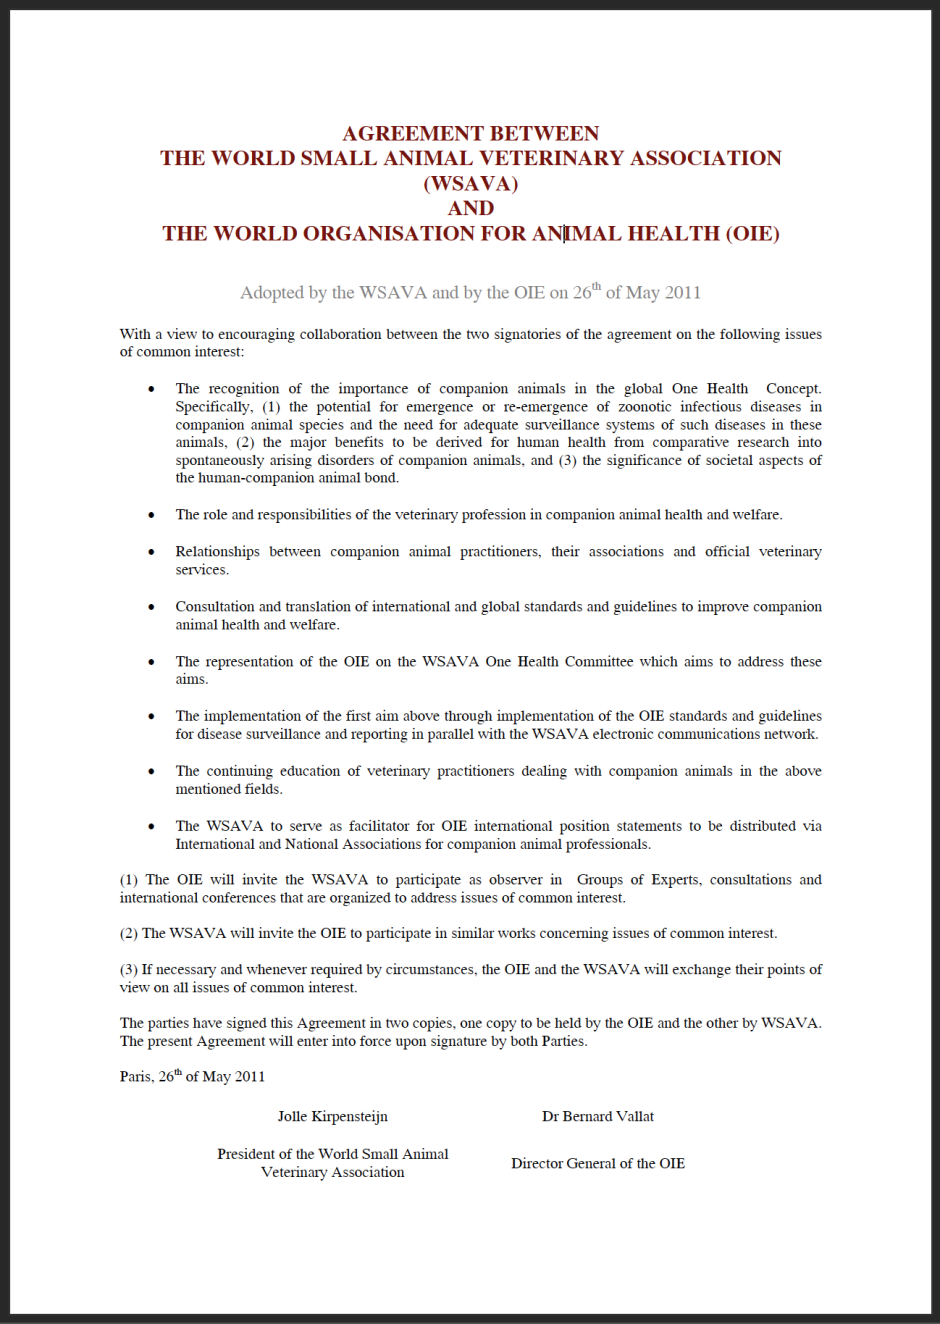 Agreement with the world small animal veterinary association (WSAVA)